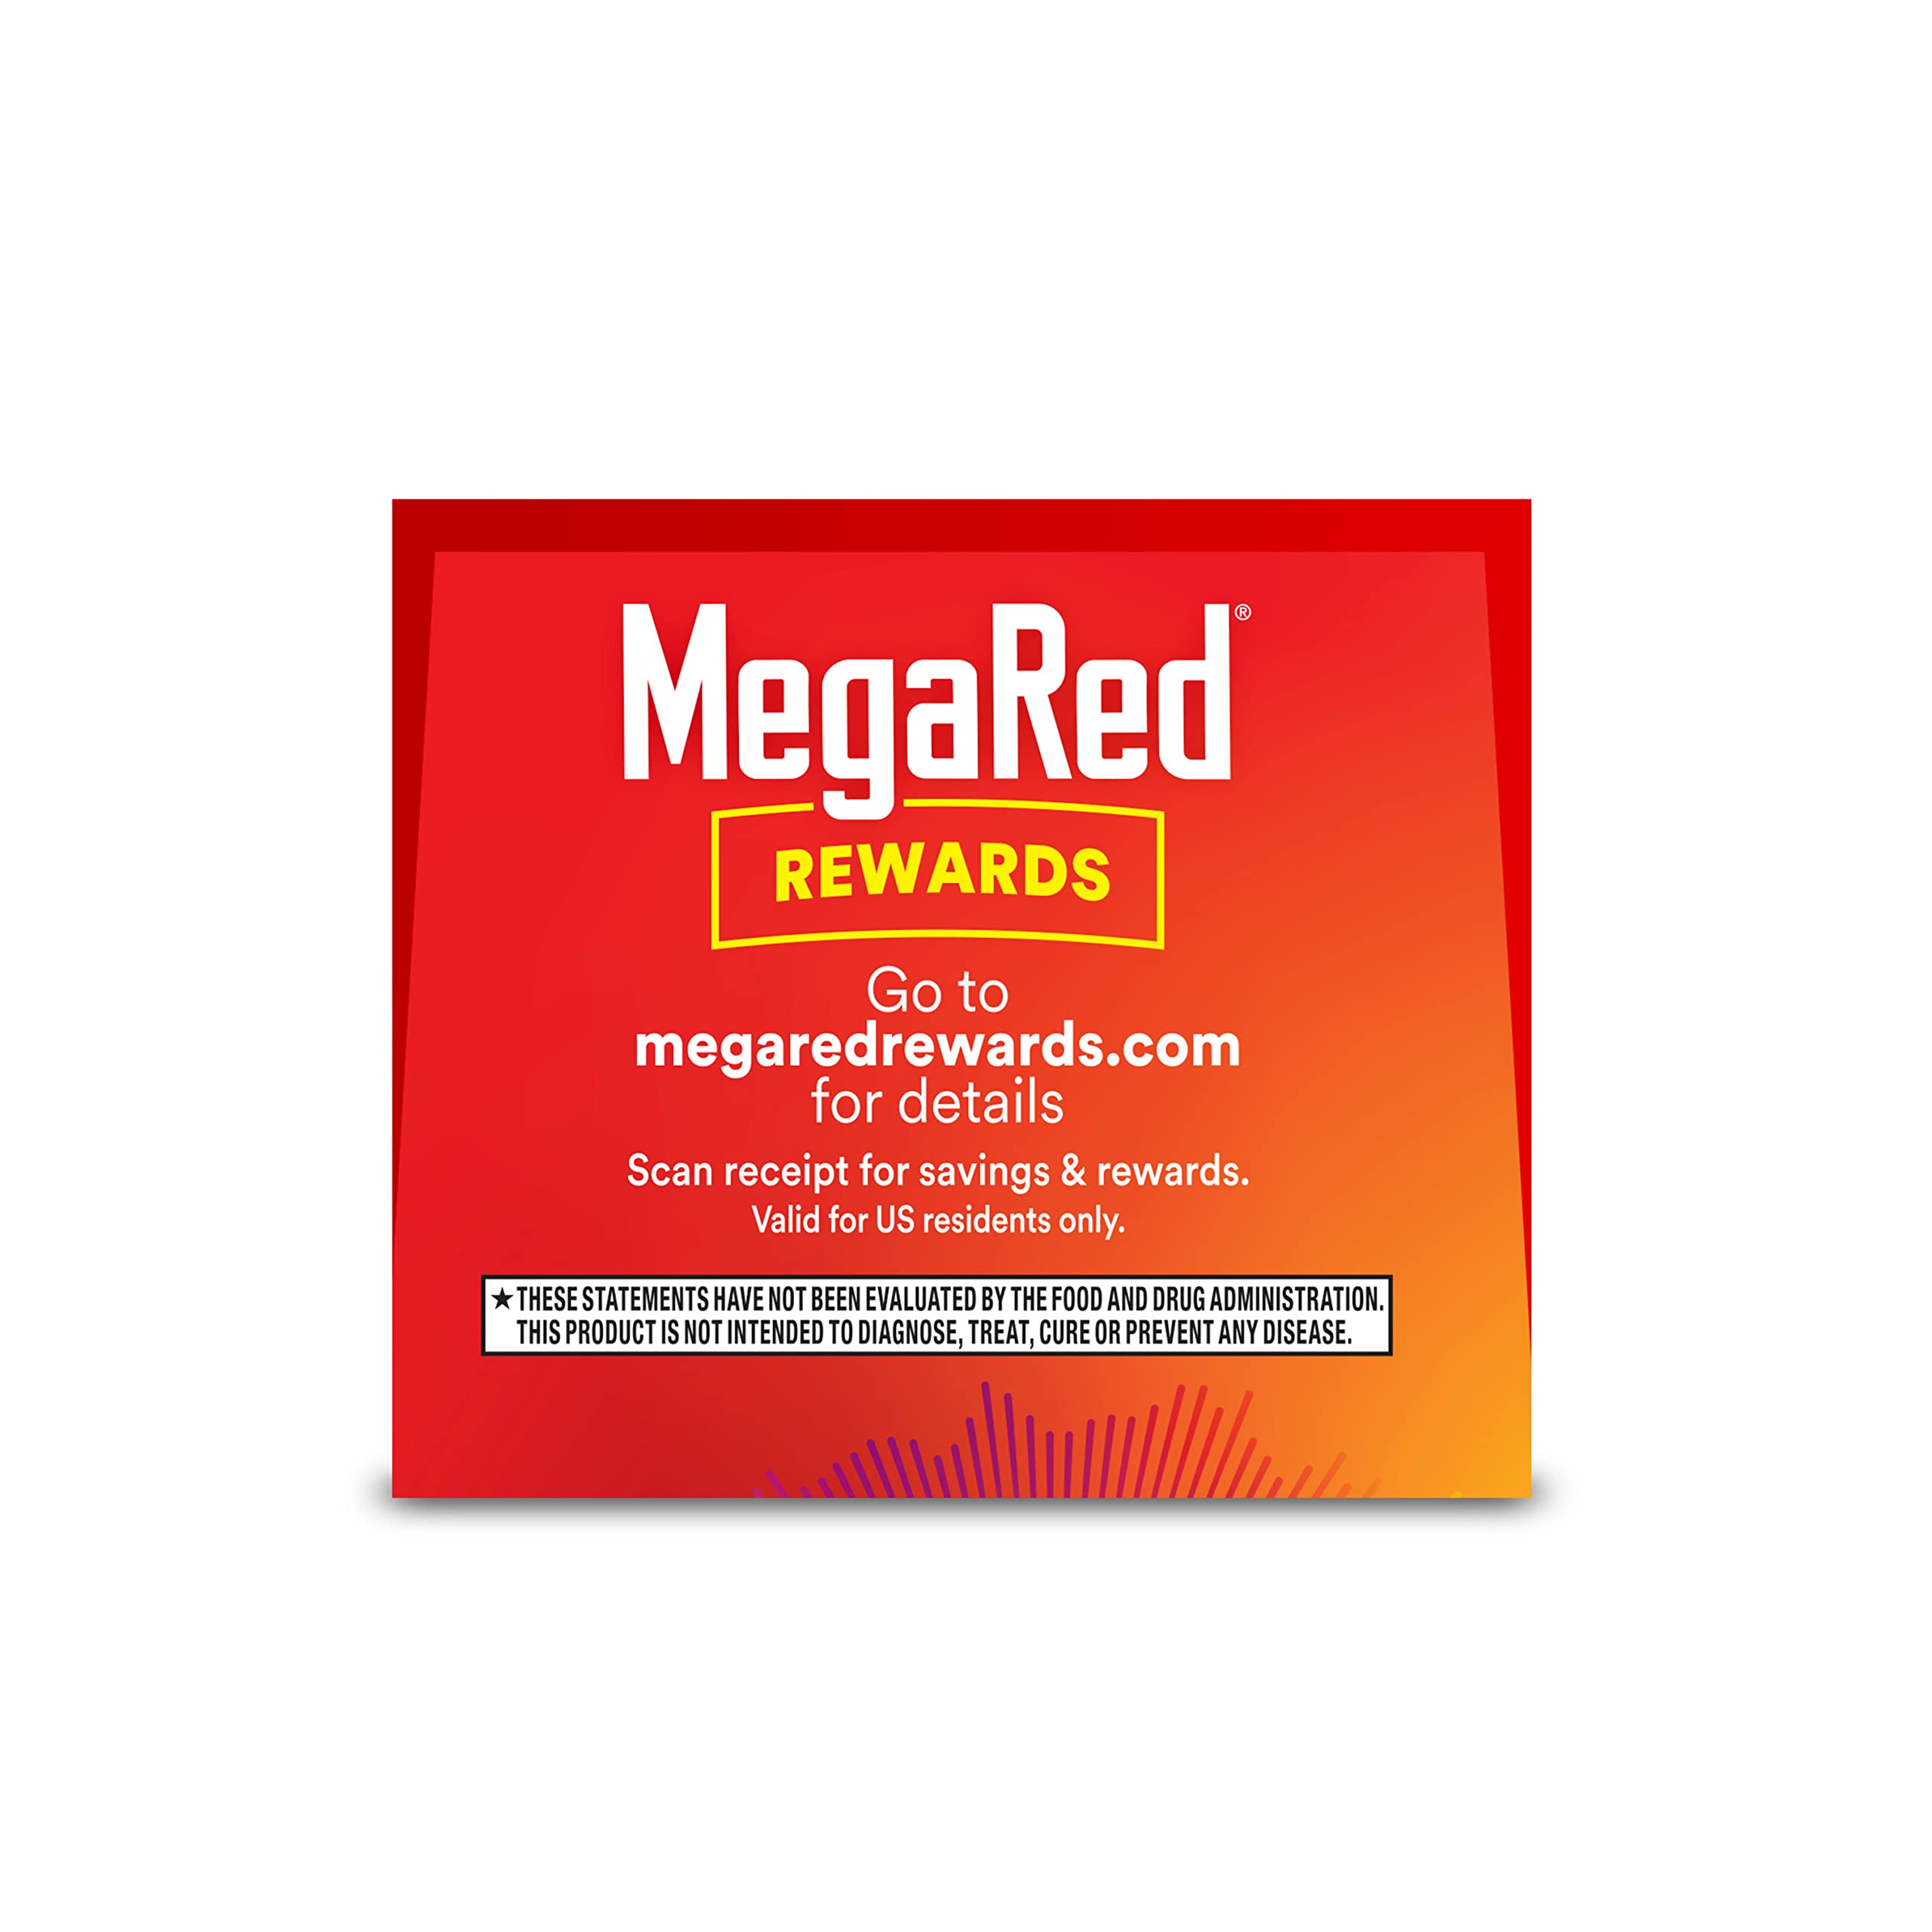 Megared Omega 3 Fish Oil & Antarctic Krill Oil Softgels for Brain, Heart, Joints & Eye Support, (80 Count Bottle), Concentrated Omega 3 Fatty Acid Supplement with EPA, DHA, Phospholipids